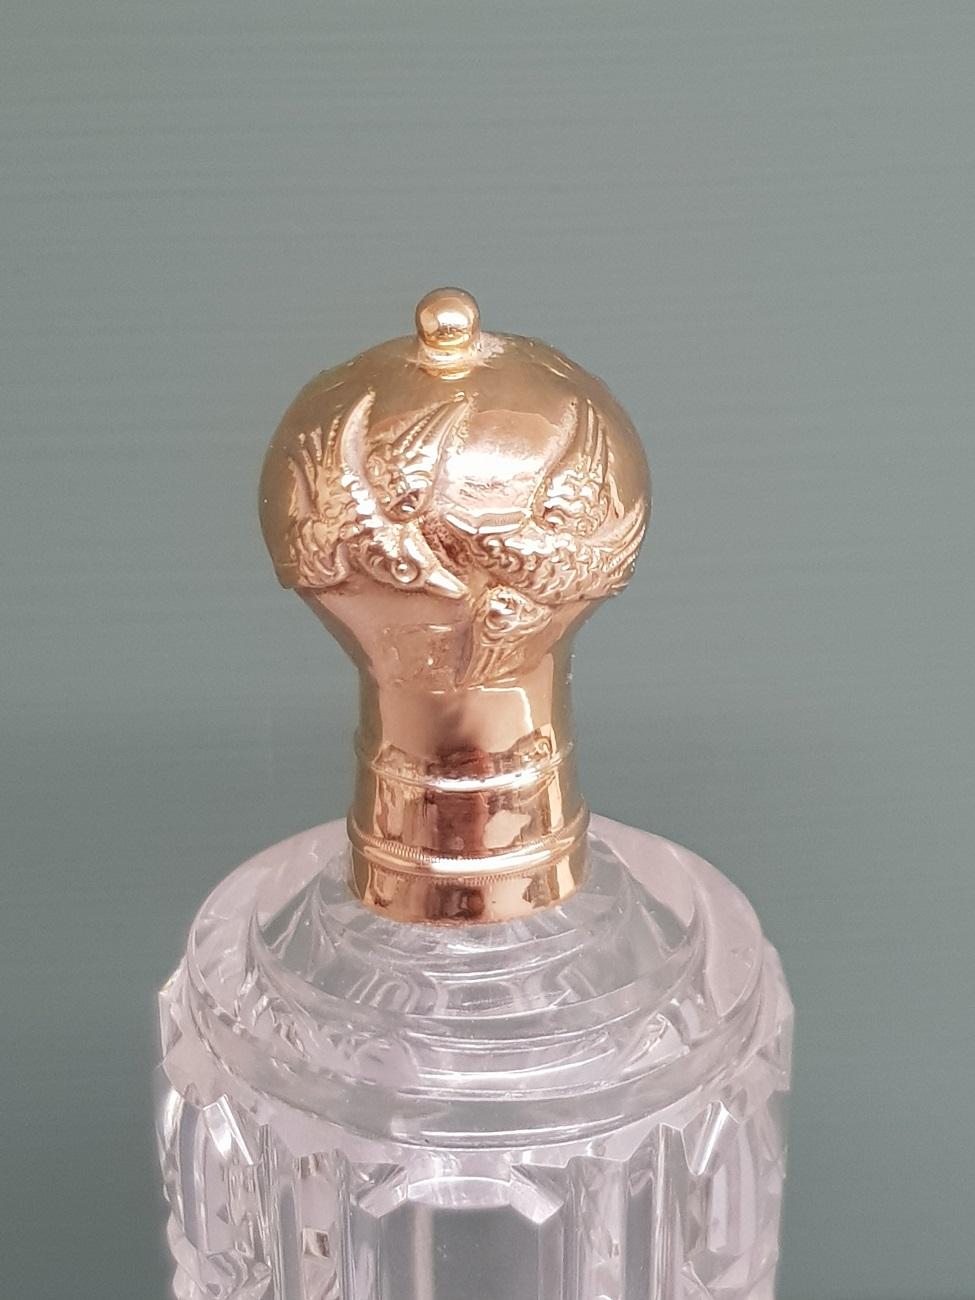 Antique Dutch cut glass perfume bottle with a golden cap decorated with 4 embossed birds double marked with oak leaf, 19th century or early 20th century.

The measurements are:
Depth 3 cm/ 1.1 inch.
Width 3 cm/ 1.1 inch.
Height 9.5 cm/ 3.7 inch.